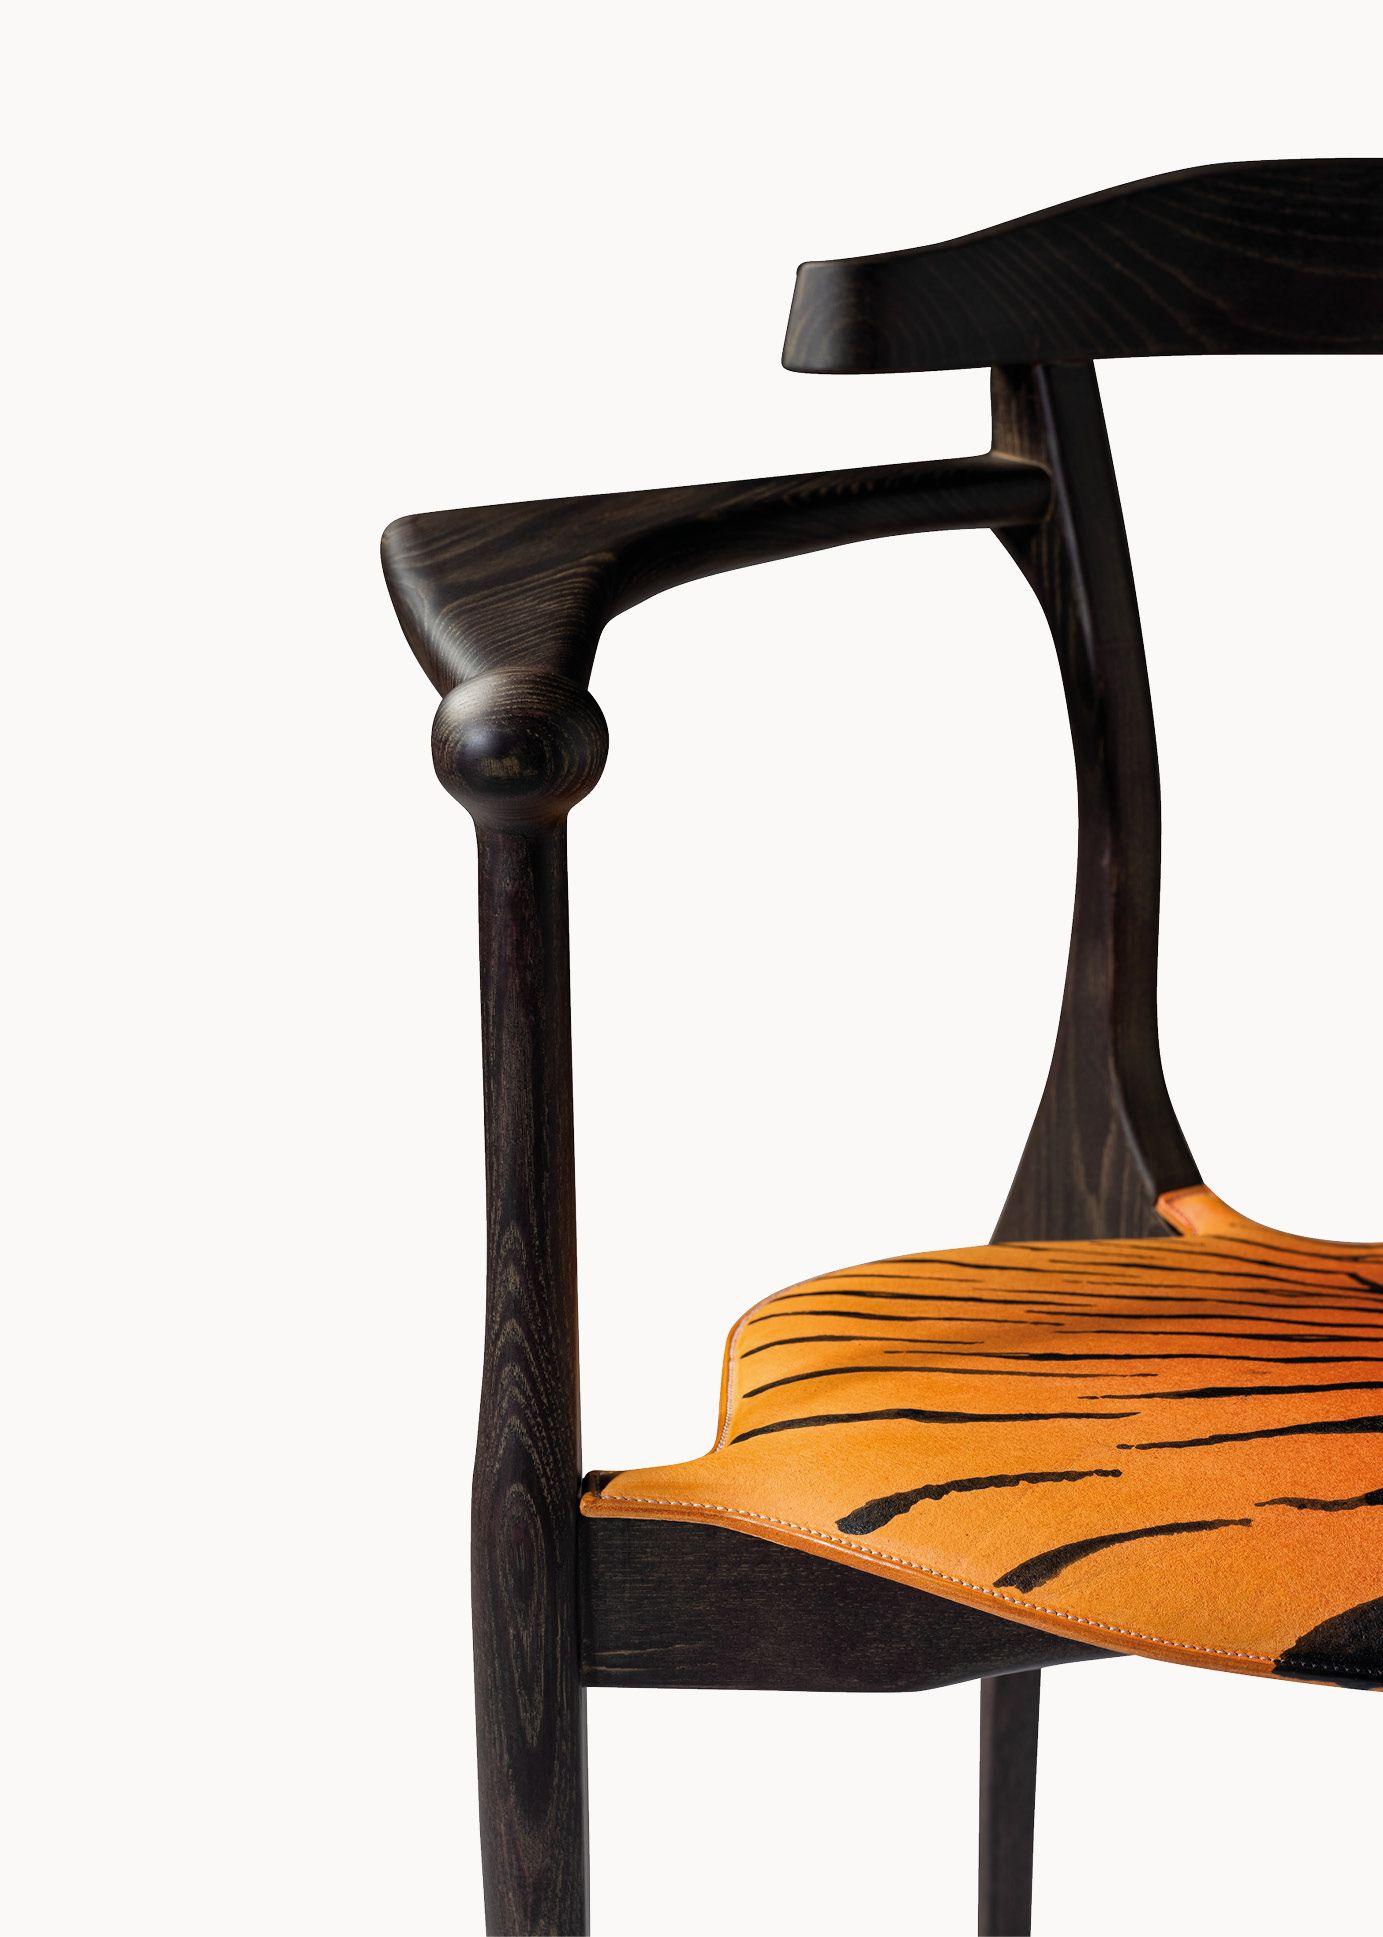 Tiger Art Gaulino Limited Edition Armchair by Oscar Tusquets In New Condition For Sale In Barcelona, Barcelona